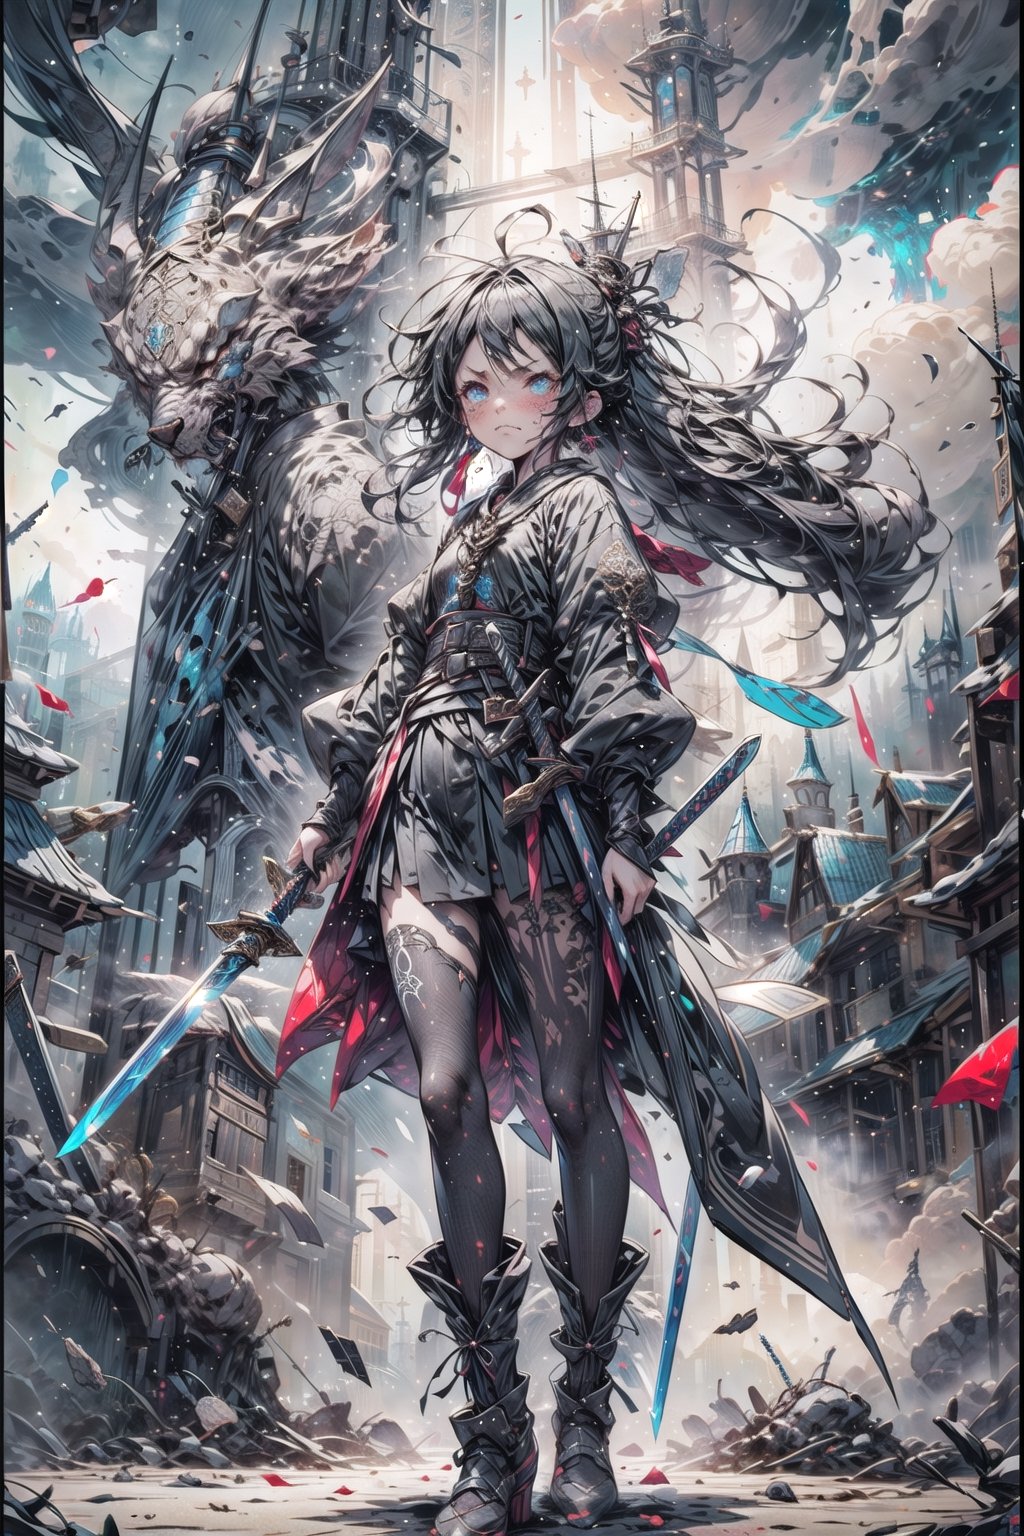 Medieval equipment,girl, knights,armed,Holding swords in one hand,serious (ensemble stars!),sad_face,shed tears,nuttiness,weapon,fantasy00d